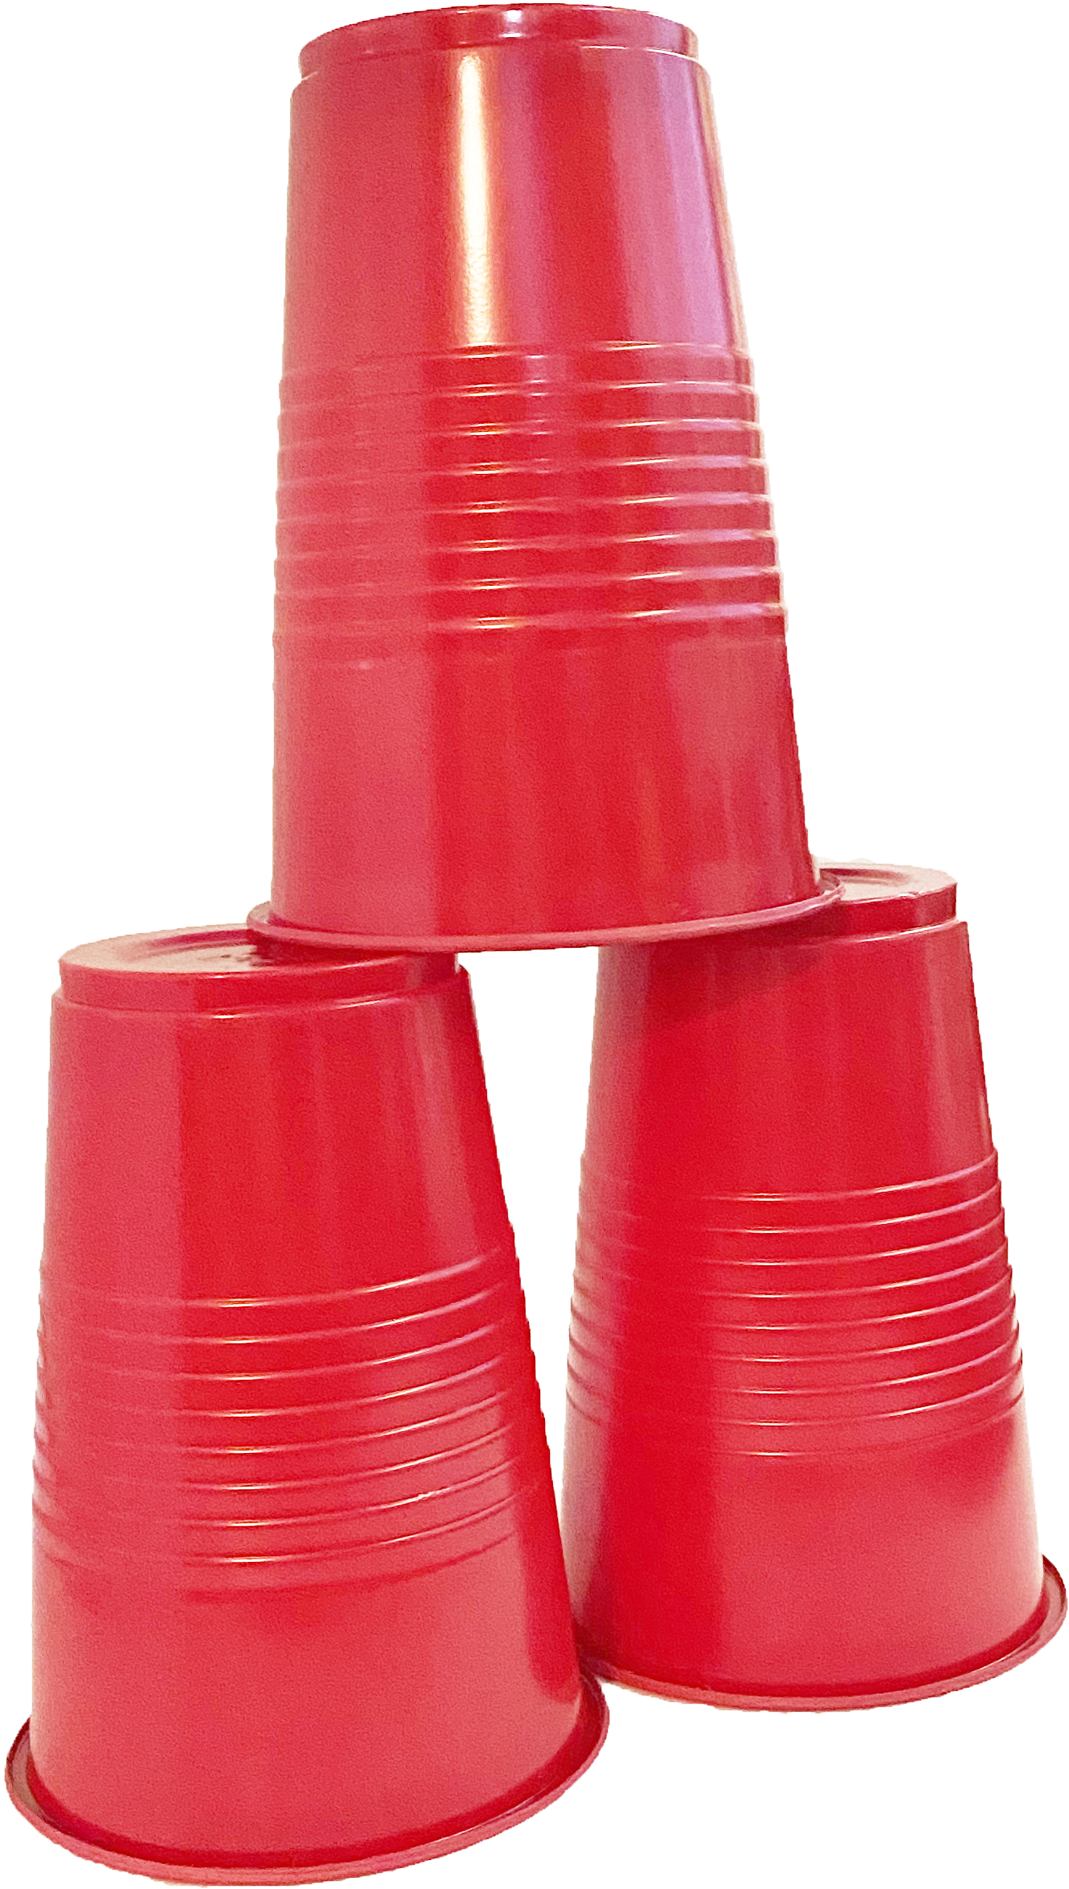 Plastic Party Cups - 16 oz, Red